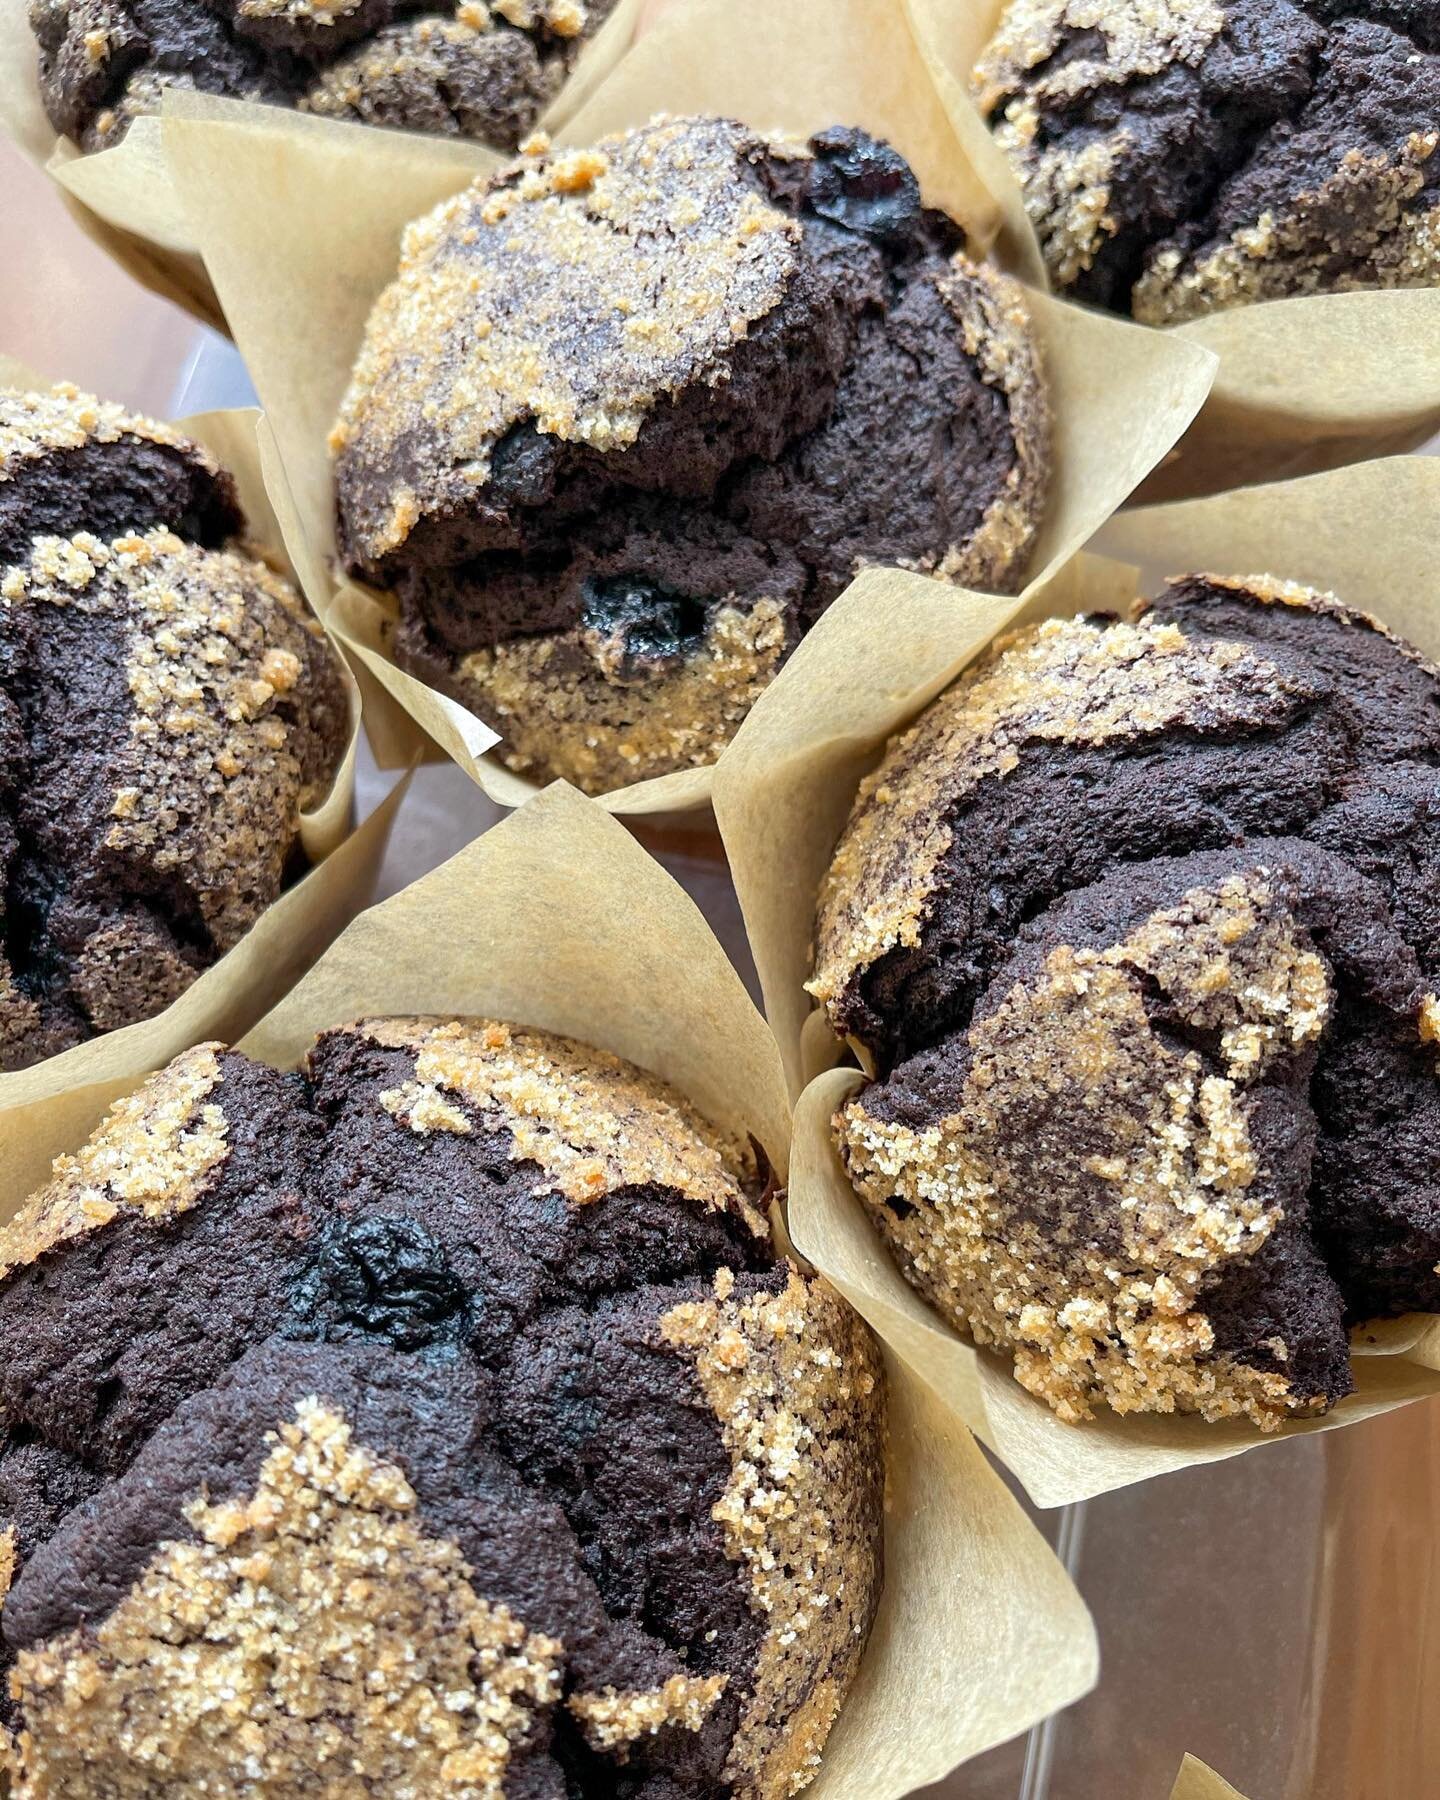 🍫 + 🫐 = our new favorite muffin